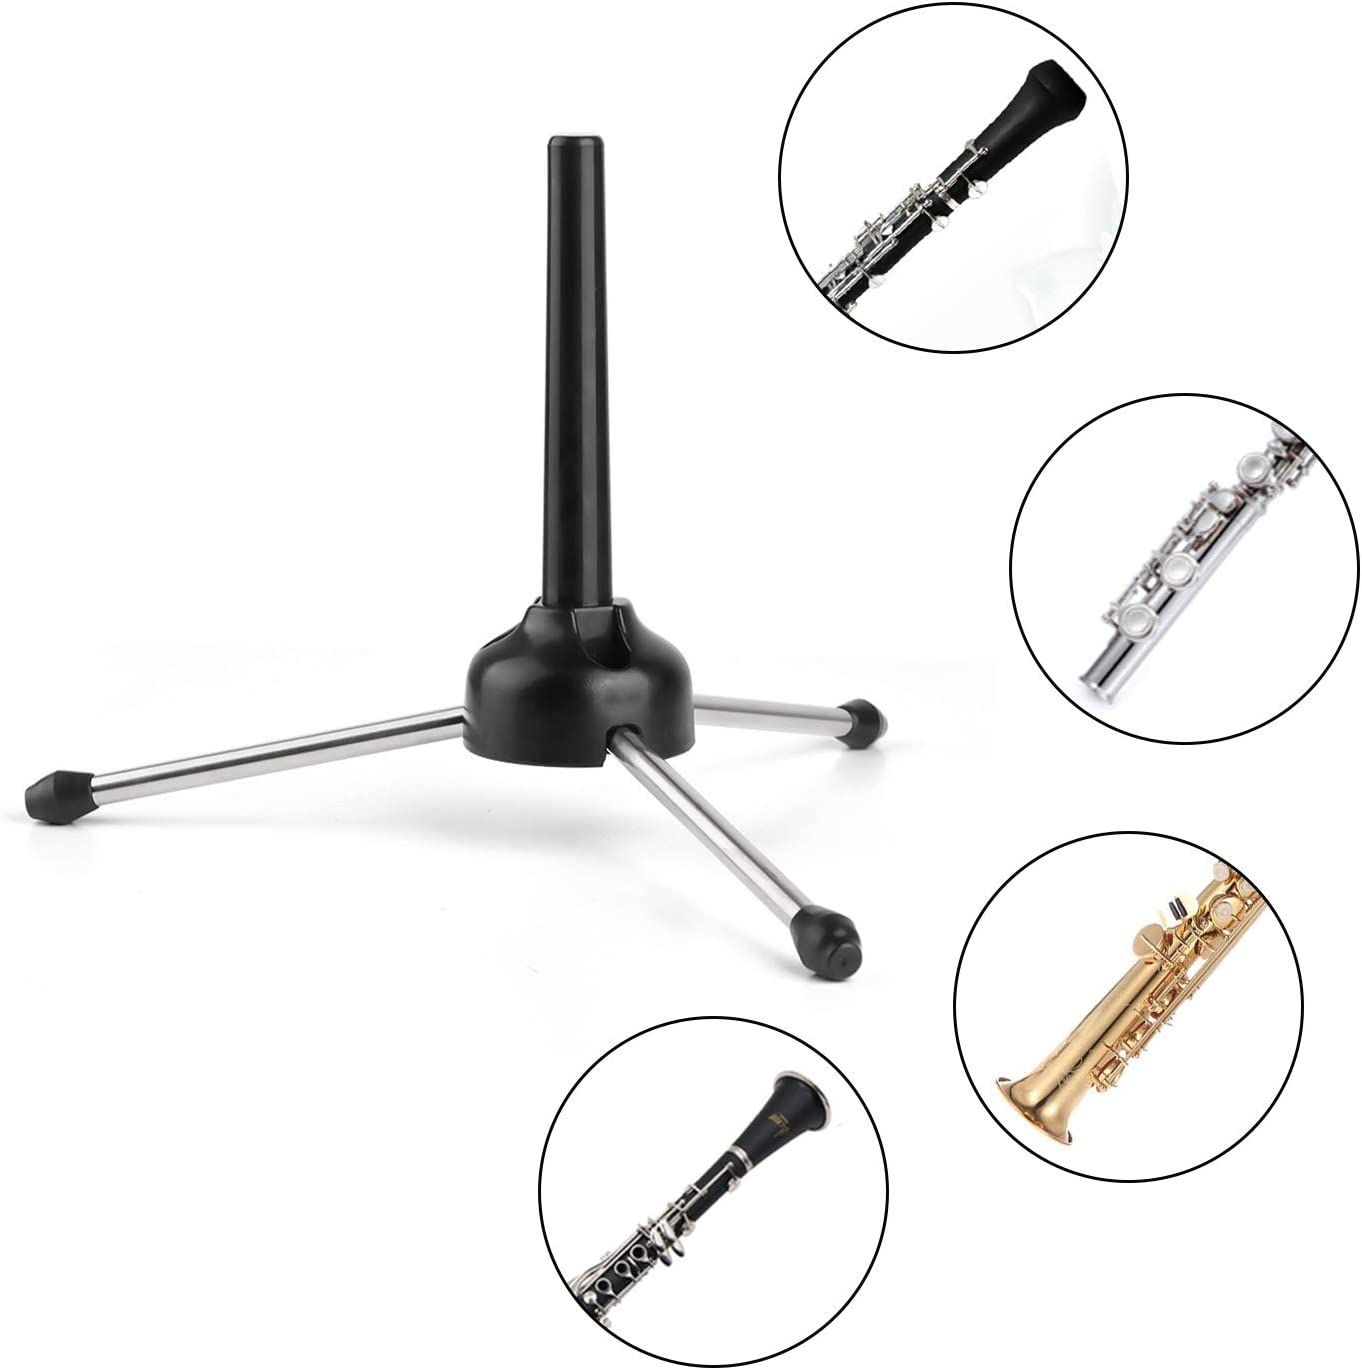 🇺🇸]Vangoa Foldable and Portable Tripod Holder Stand for Flute